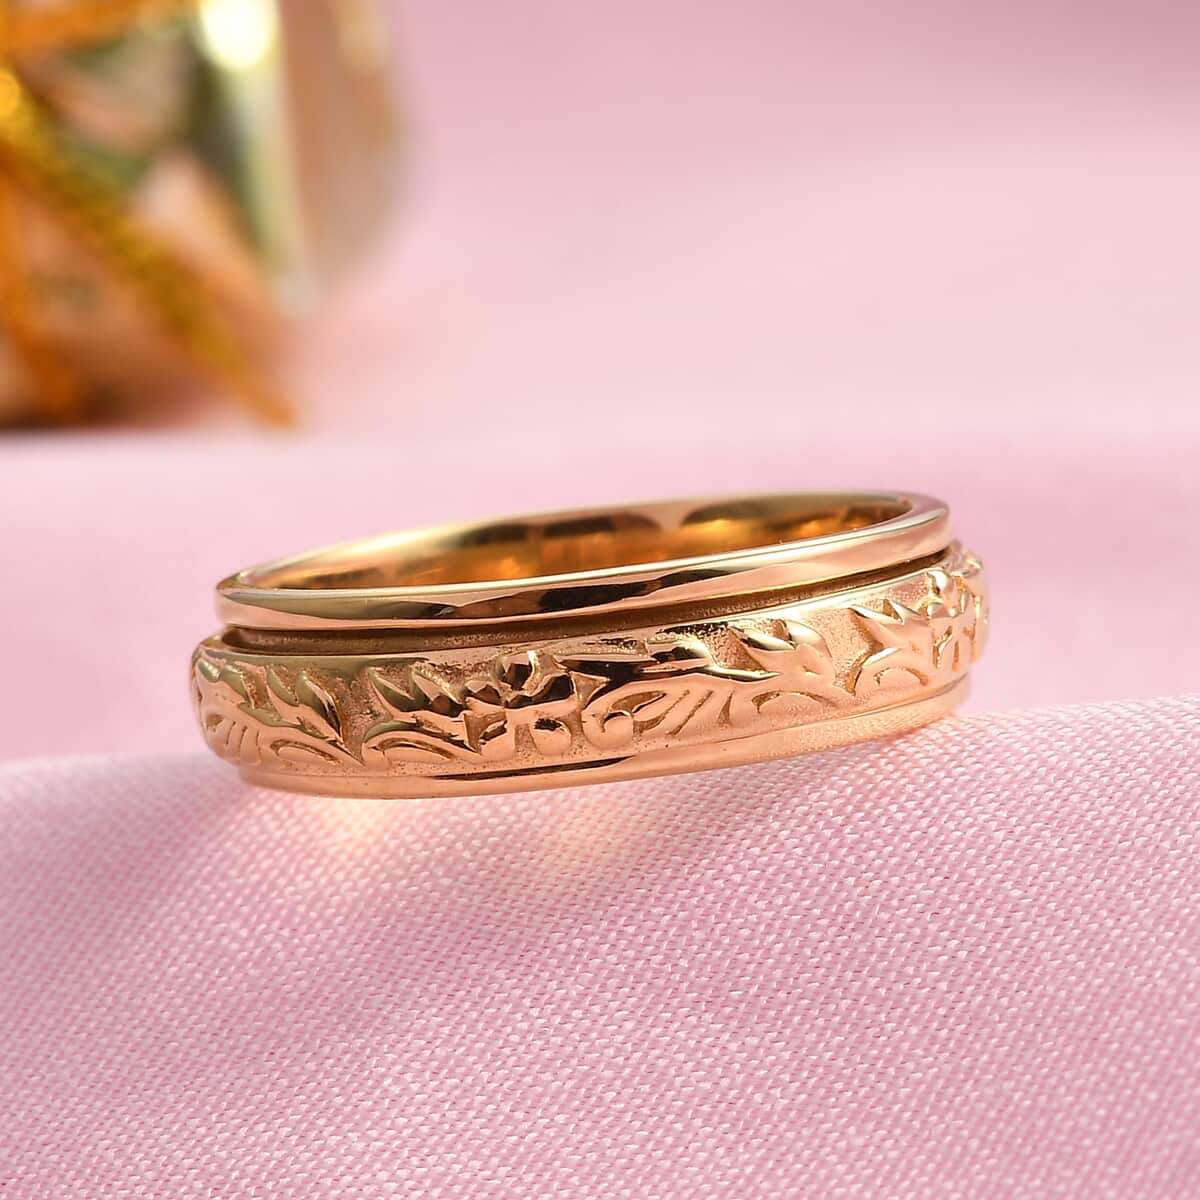 Floral Fidget Spinner Ring for Anxiety in Vermeil Yellow Gold Over Sterling Silver, Anxiety Ring for Women, Fidget Rings for Anxiety, Promise Rings 4.50 Grams image number 1